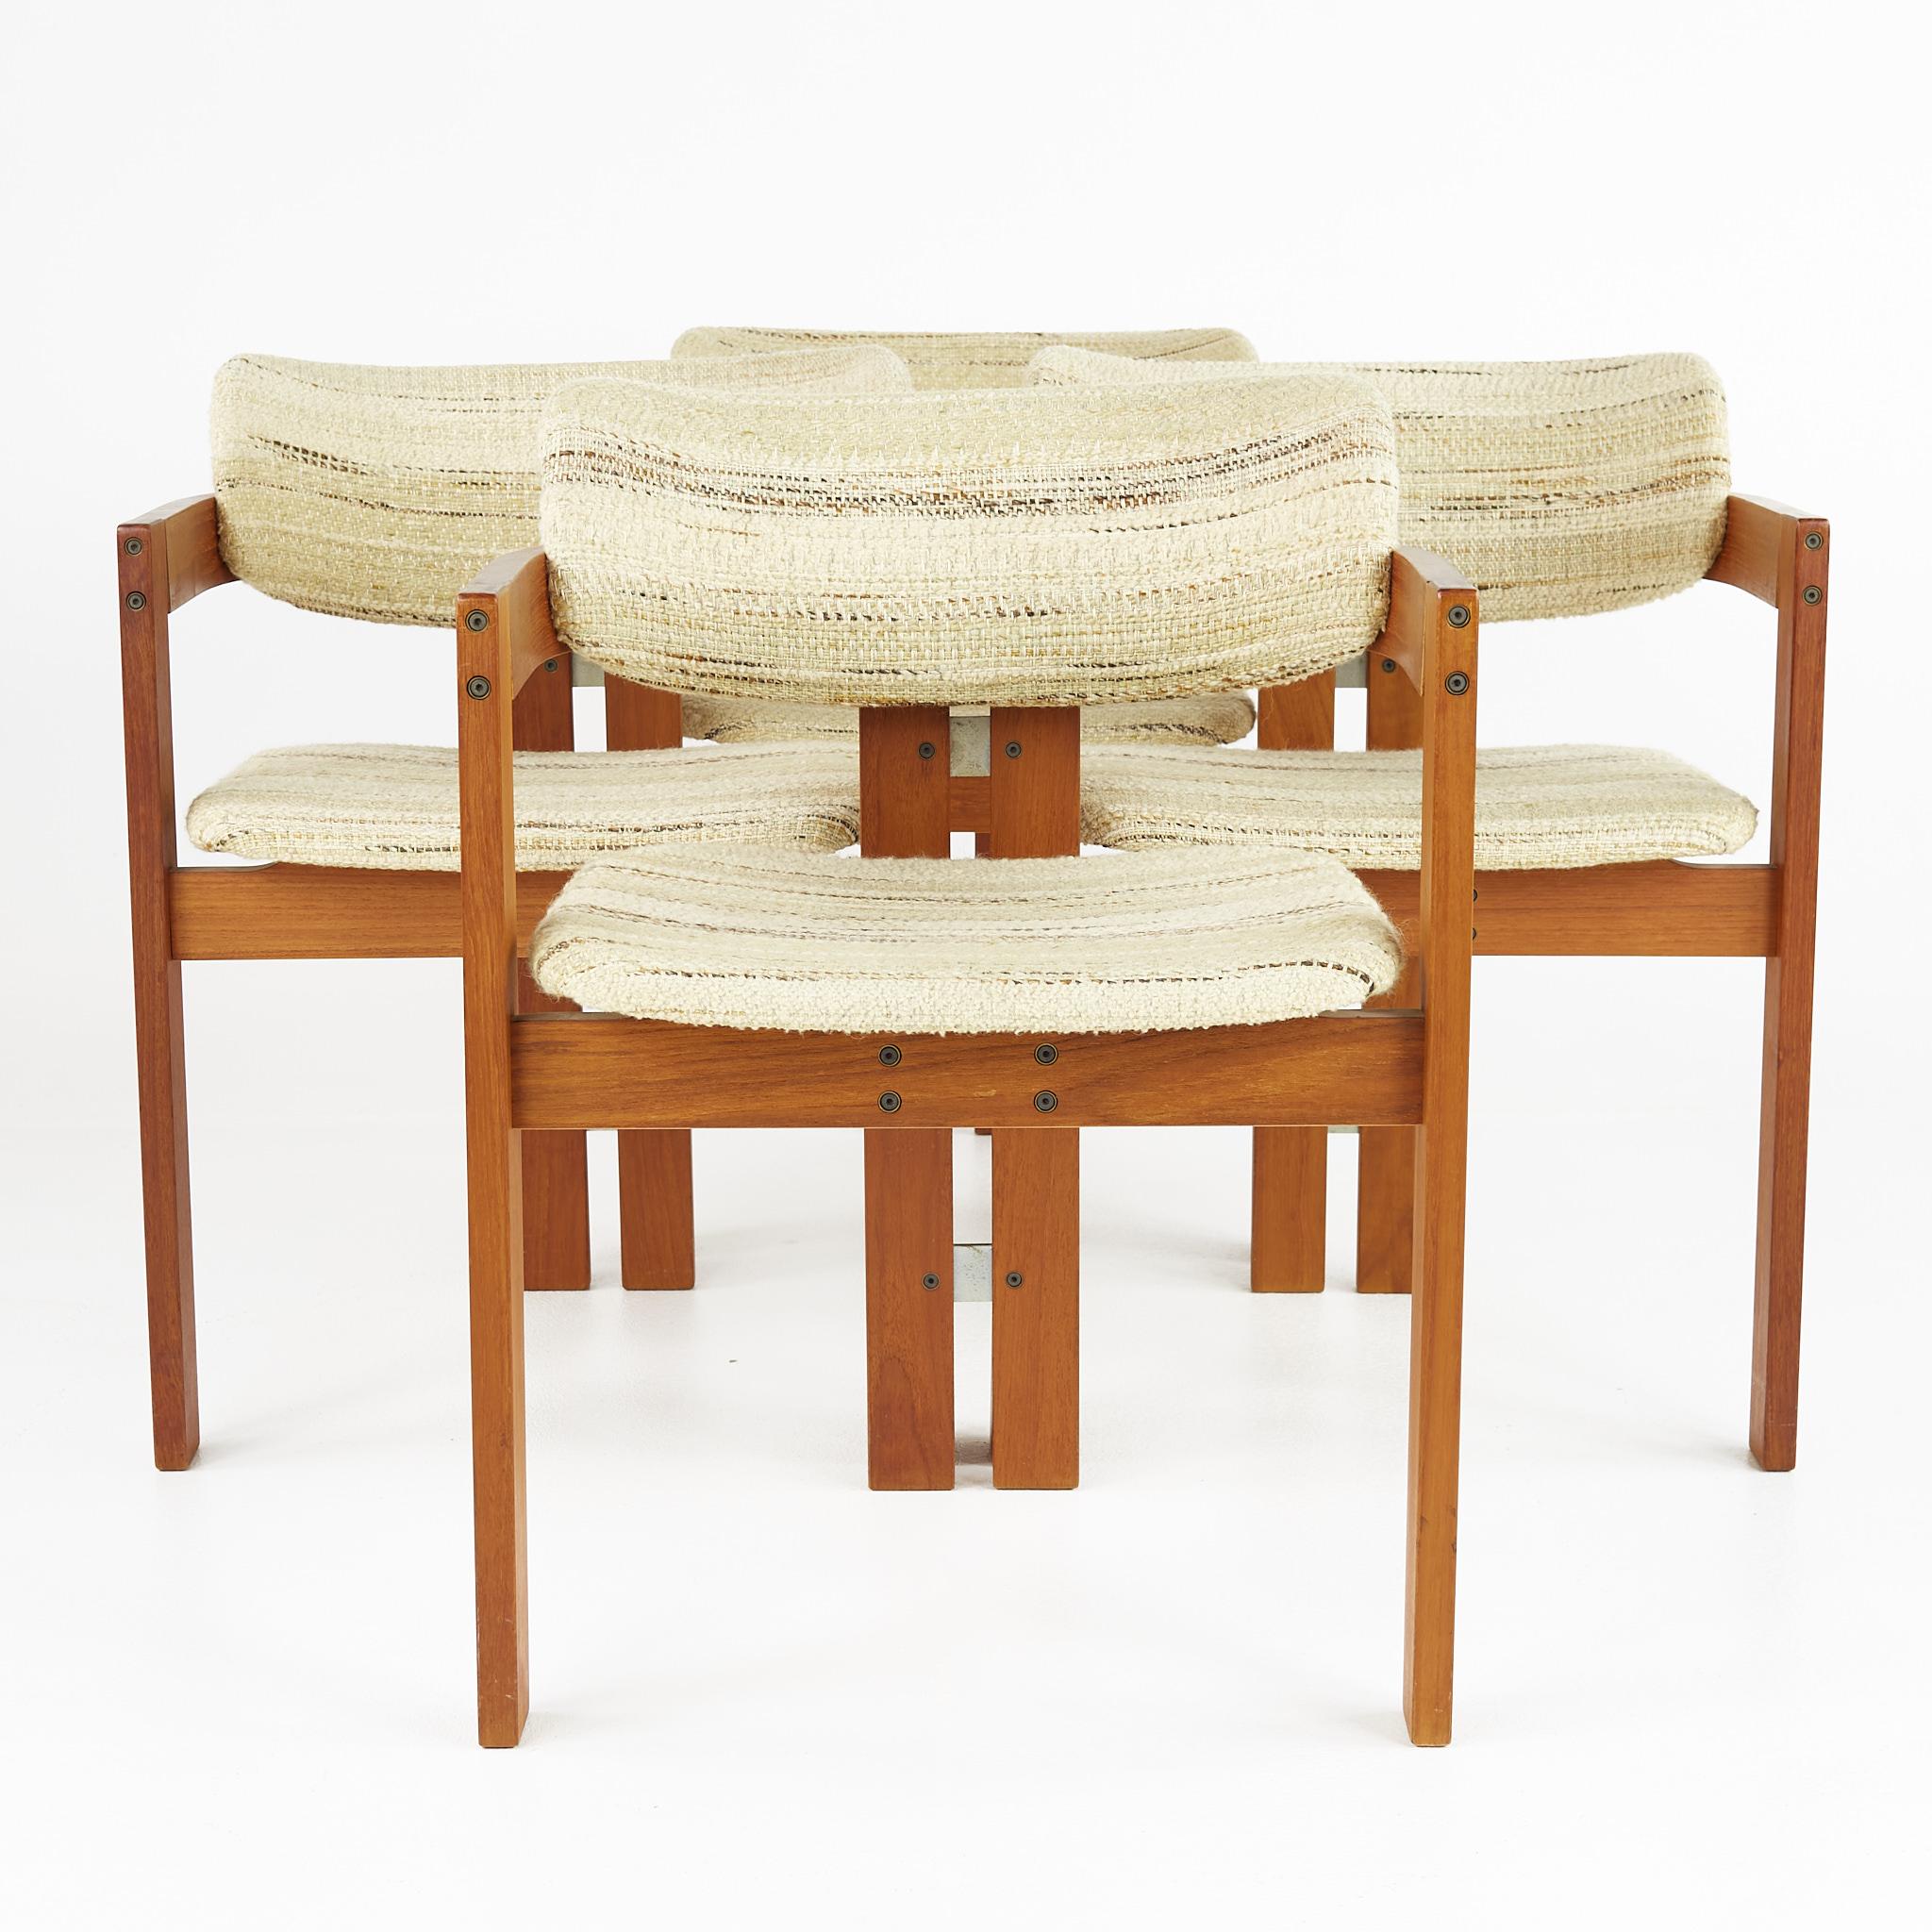 Afra and Tobia Scarpa style mid century teak dining chairs - set of 4

Each chair measures: 21.5 wide x 19.5 deep x 28.5 inches high, with a seat height of 18 and arm height of 25 inches

All pieces of furniture can be had in what we call